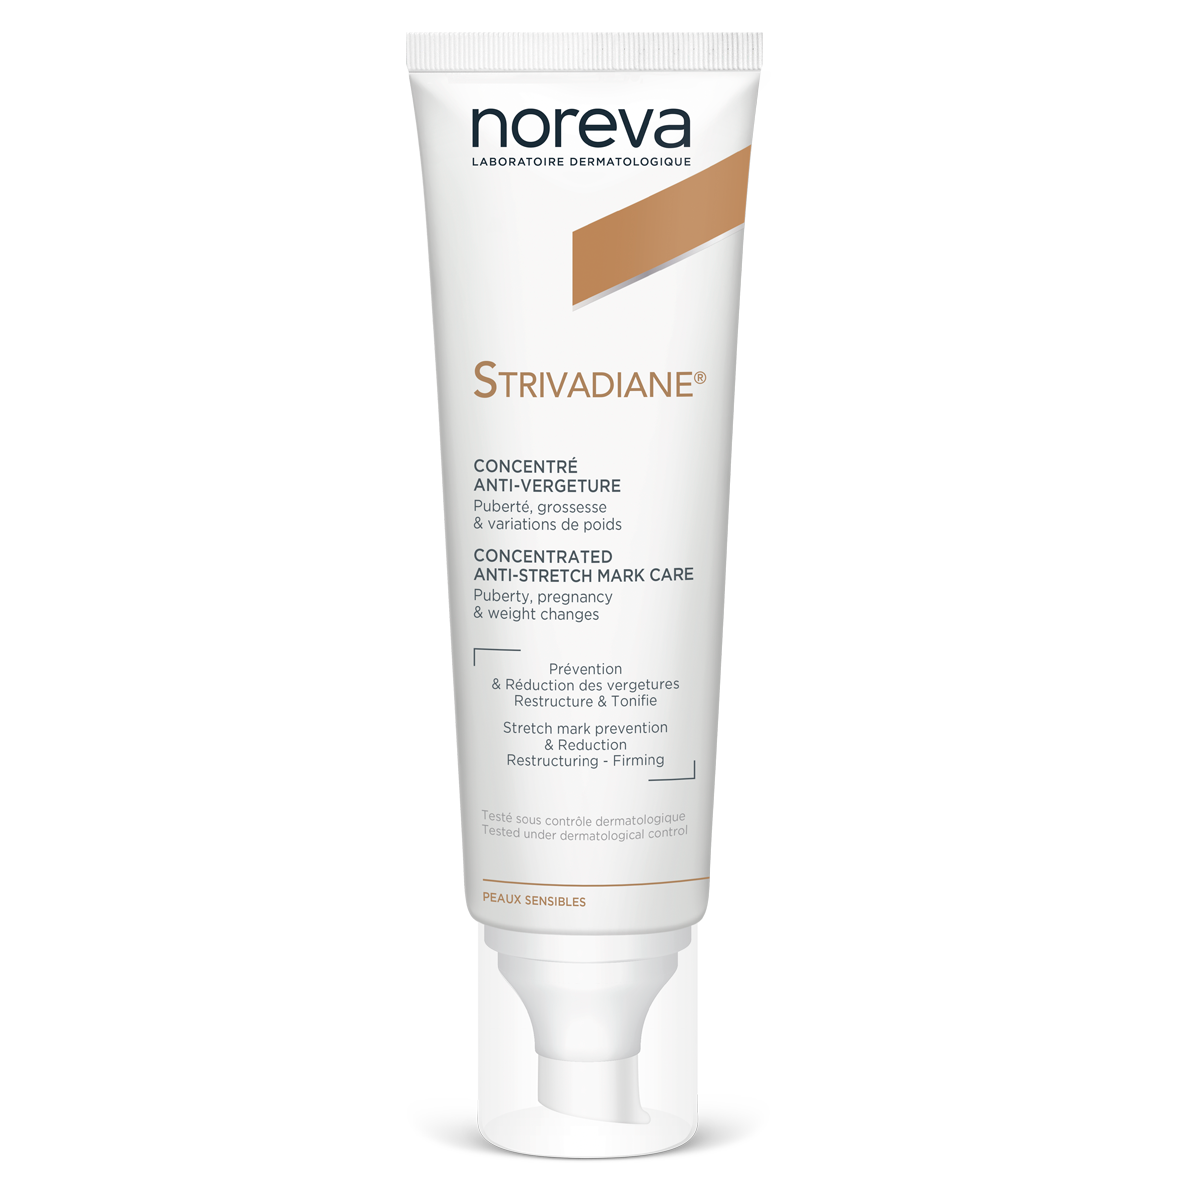 STRIVADIANE   Concentrated anti-stretching mark care